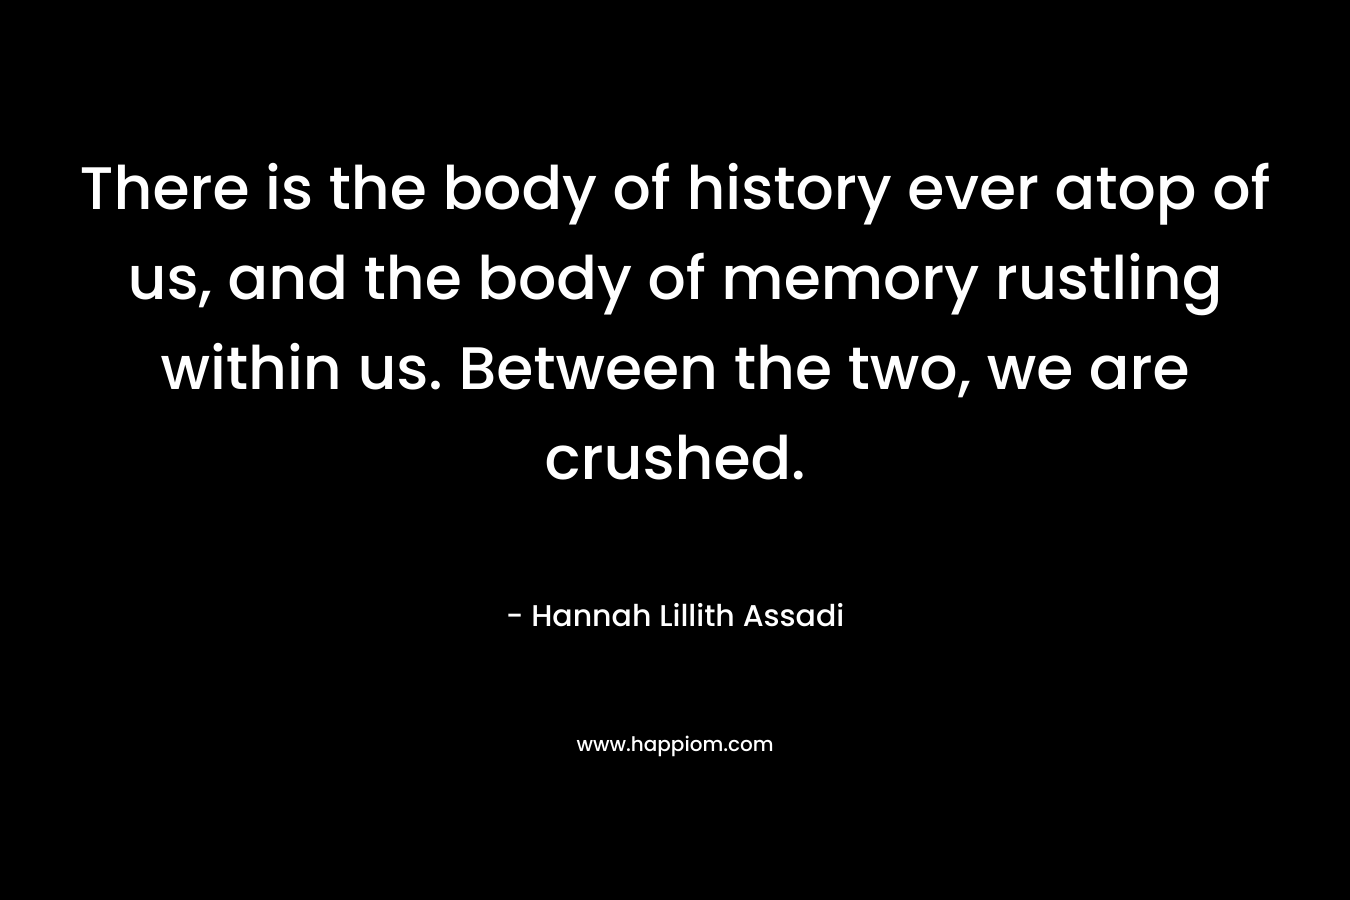 There is the body of history ever atop of us, and the body of memory rustling within us. Between the two, we are crushed.